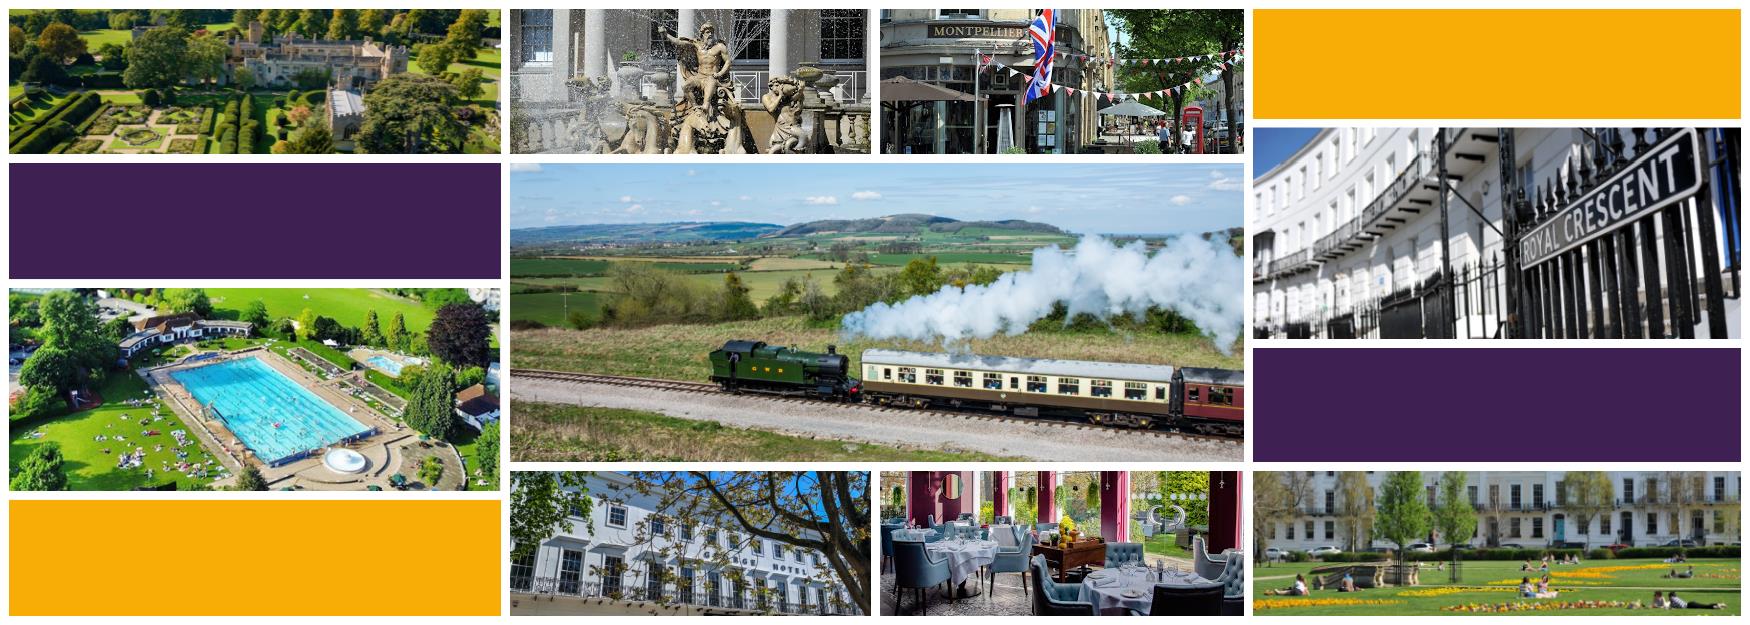 48 hours in Cheltenham and Cotswolds suggested itinerary